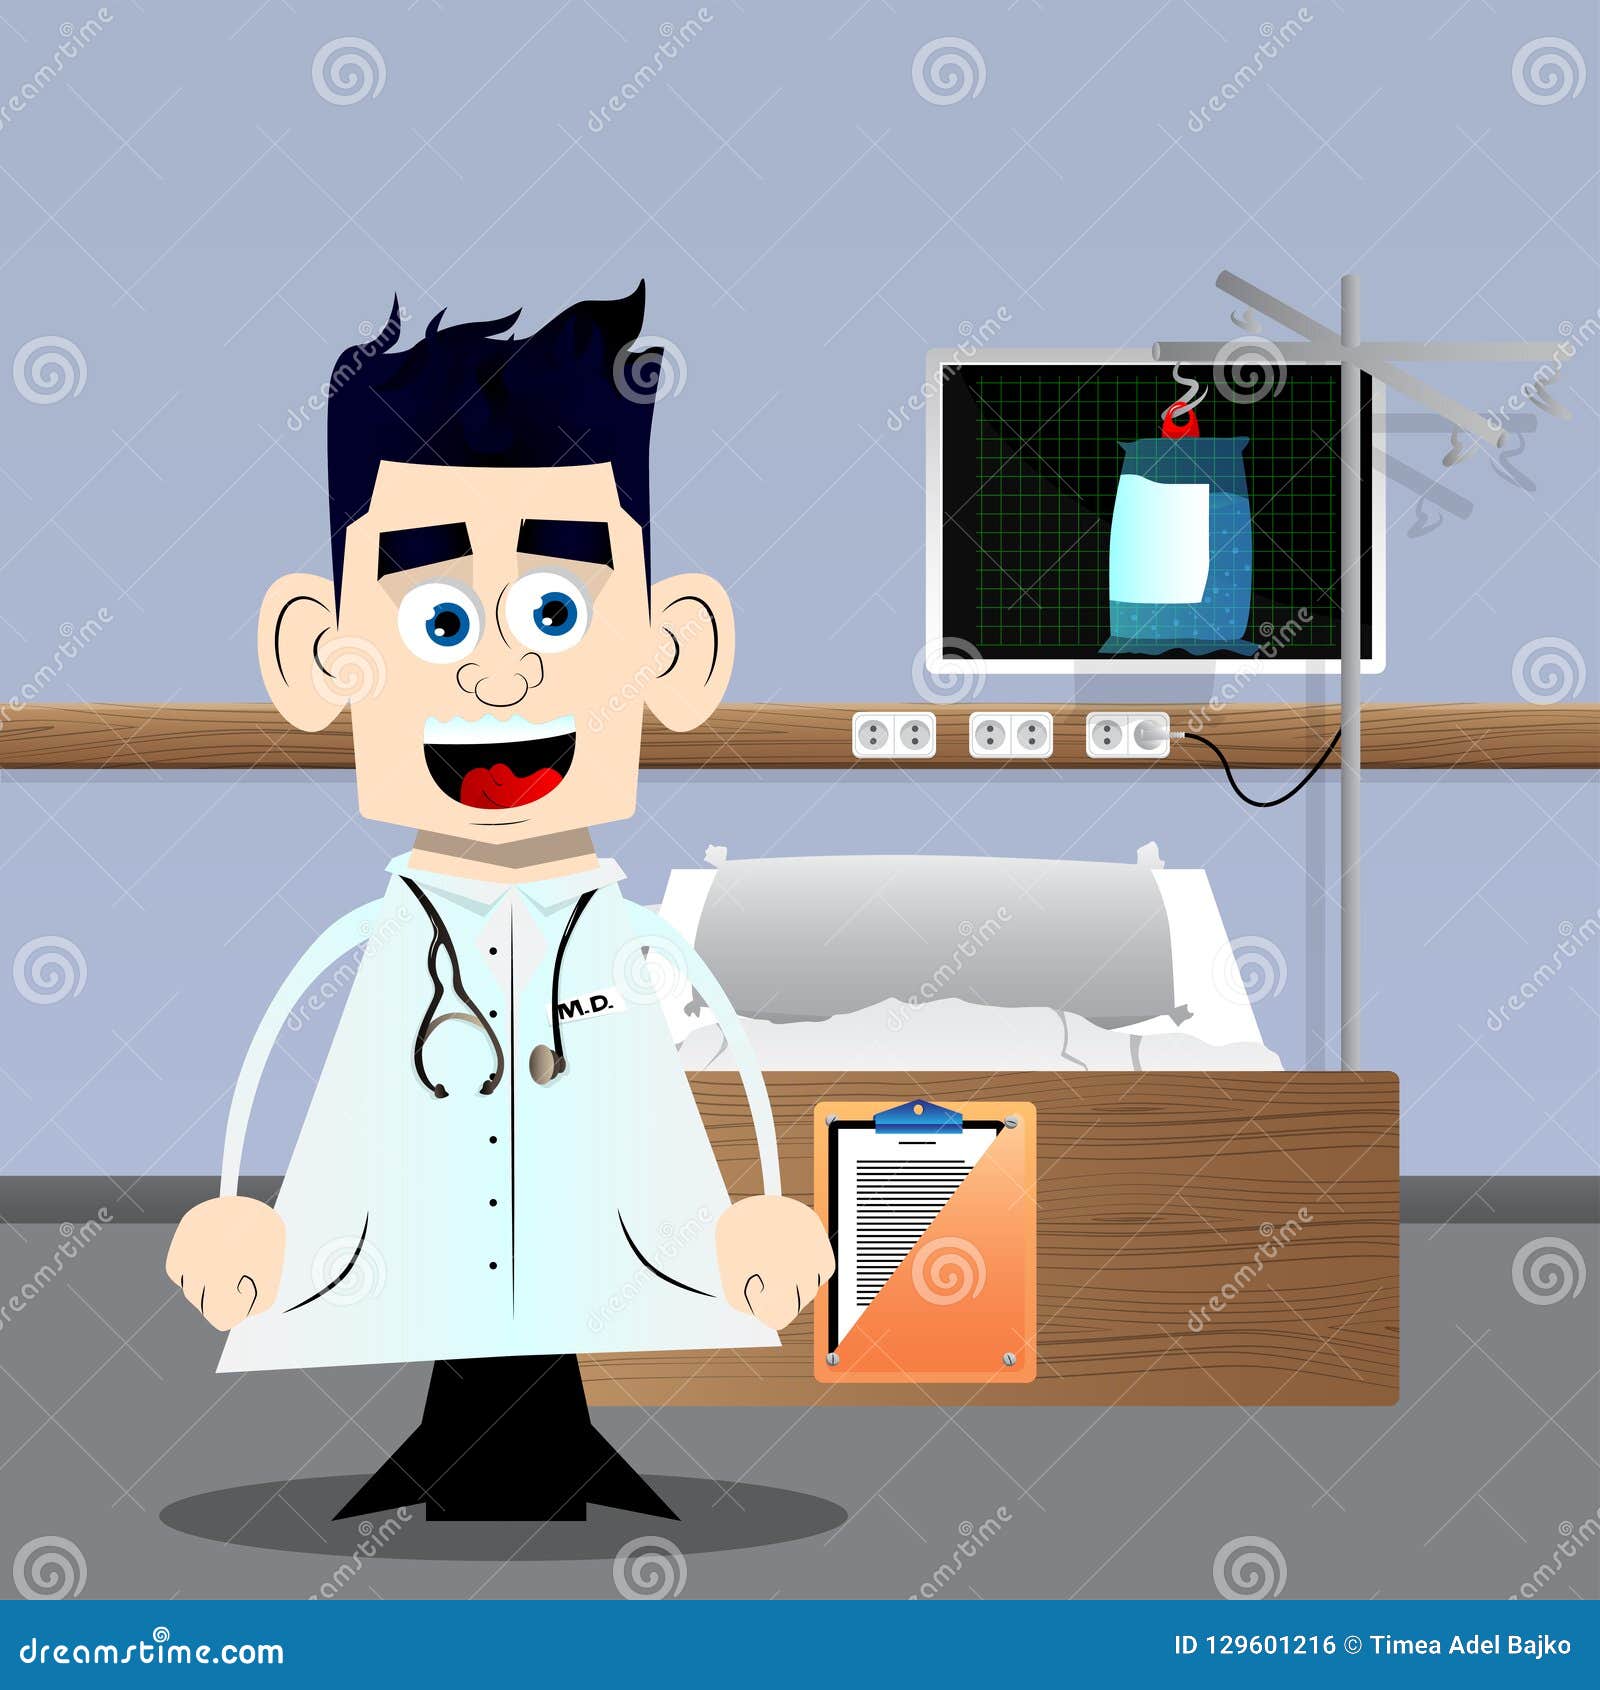 Funny and Cute Cartoon Doctor Standing. Stock Illustration ...